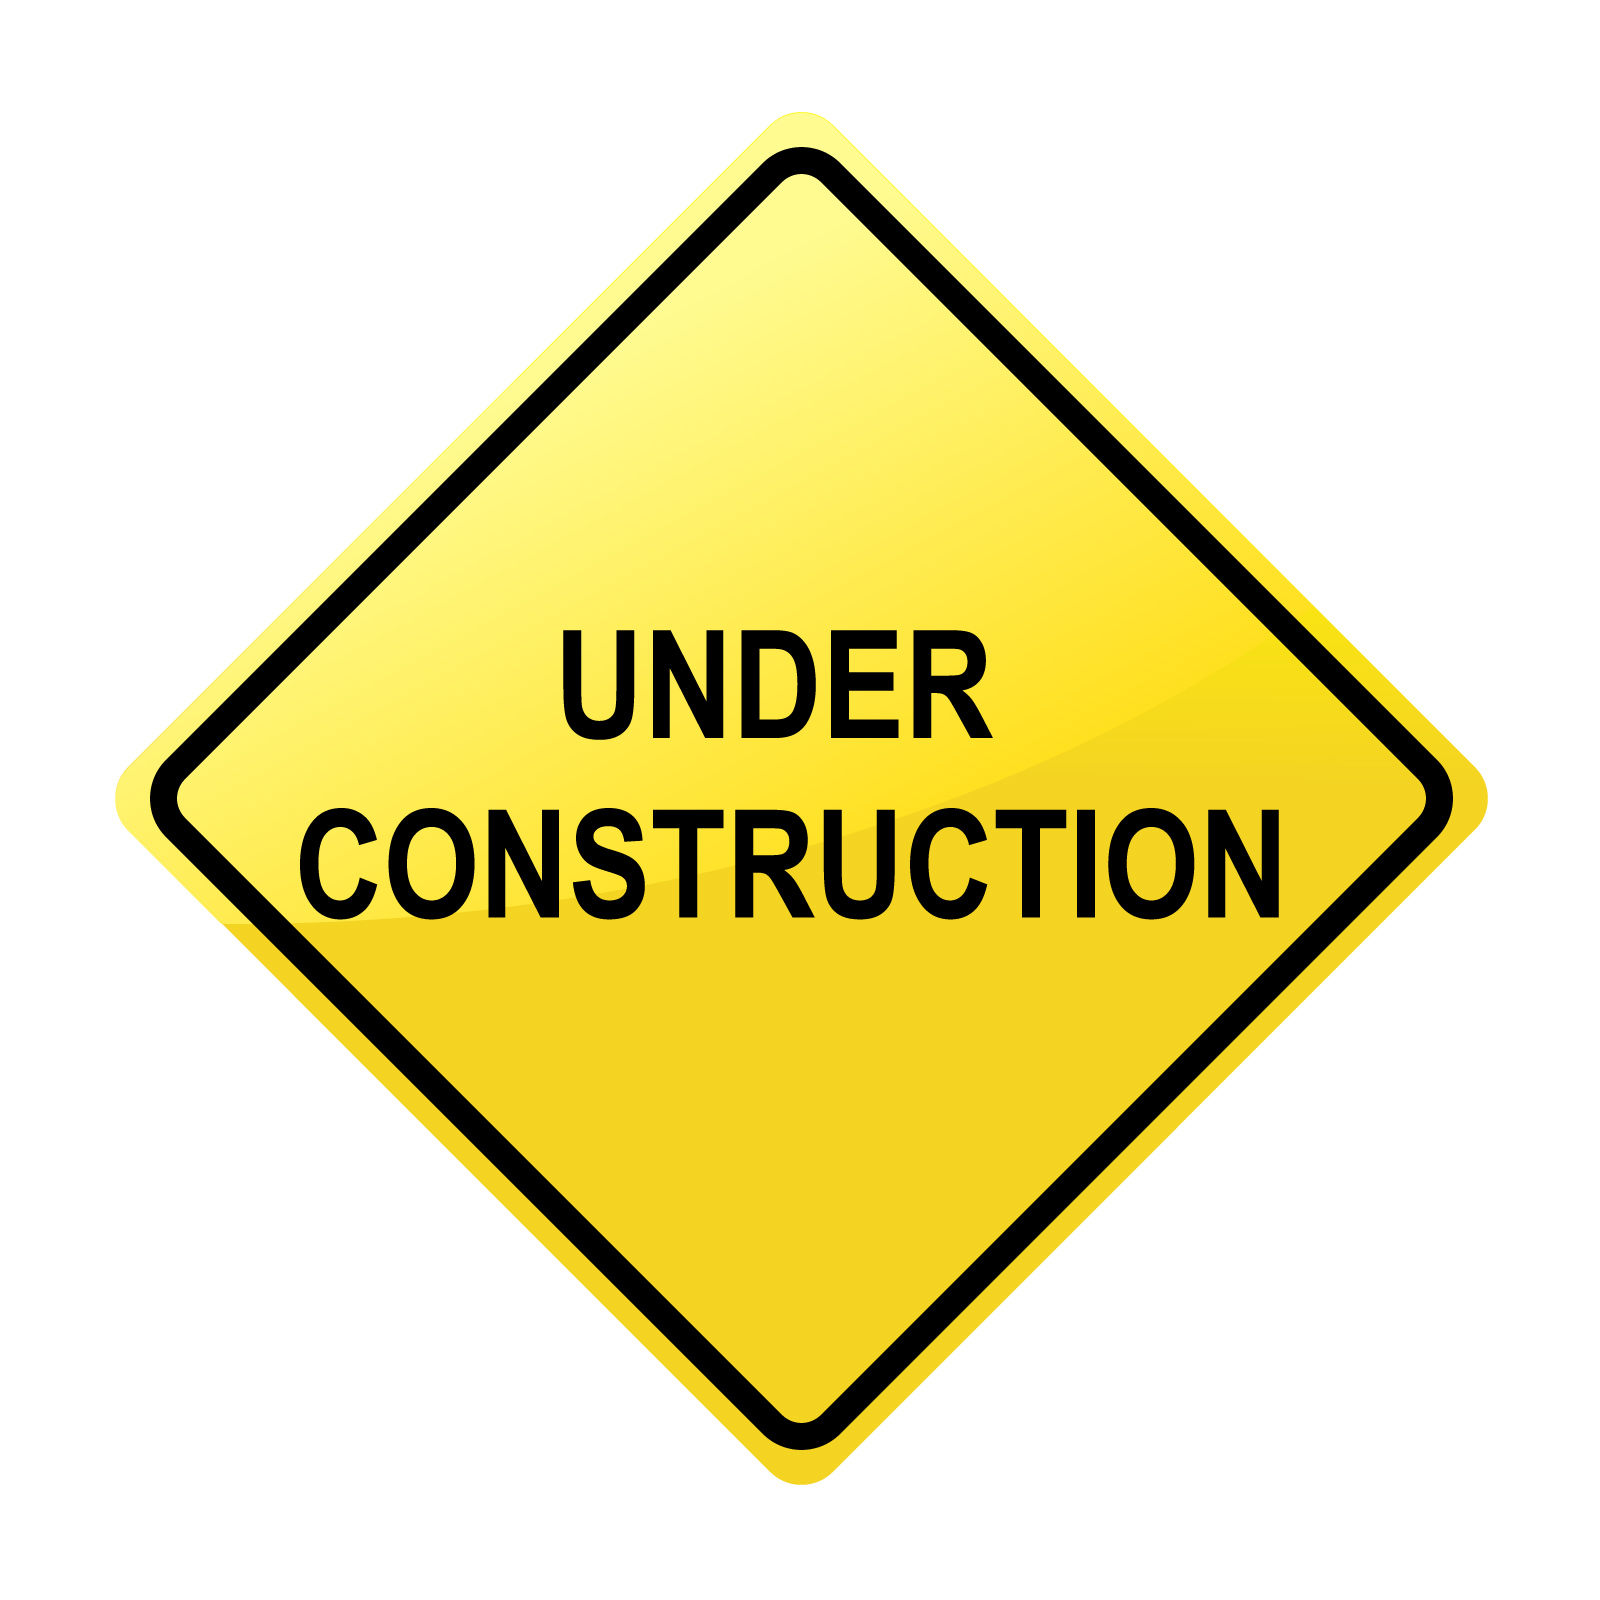 free clipart under construction - photo #16